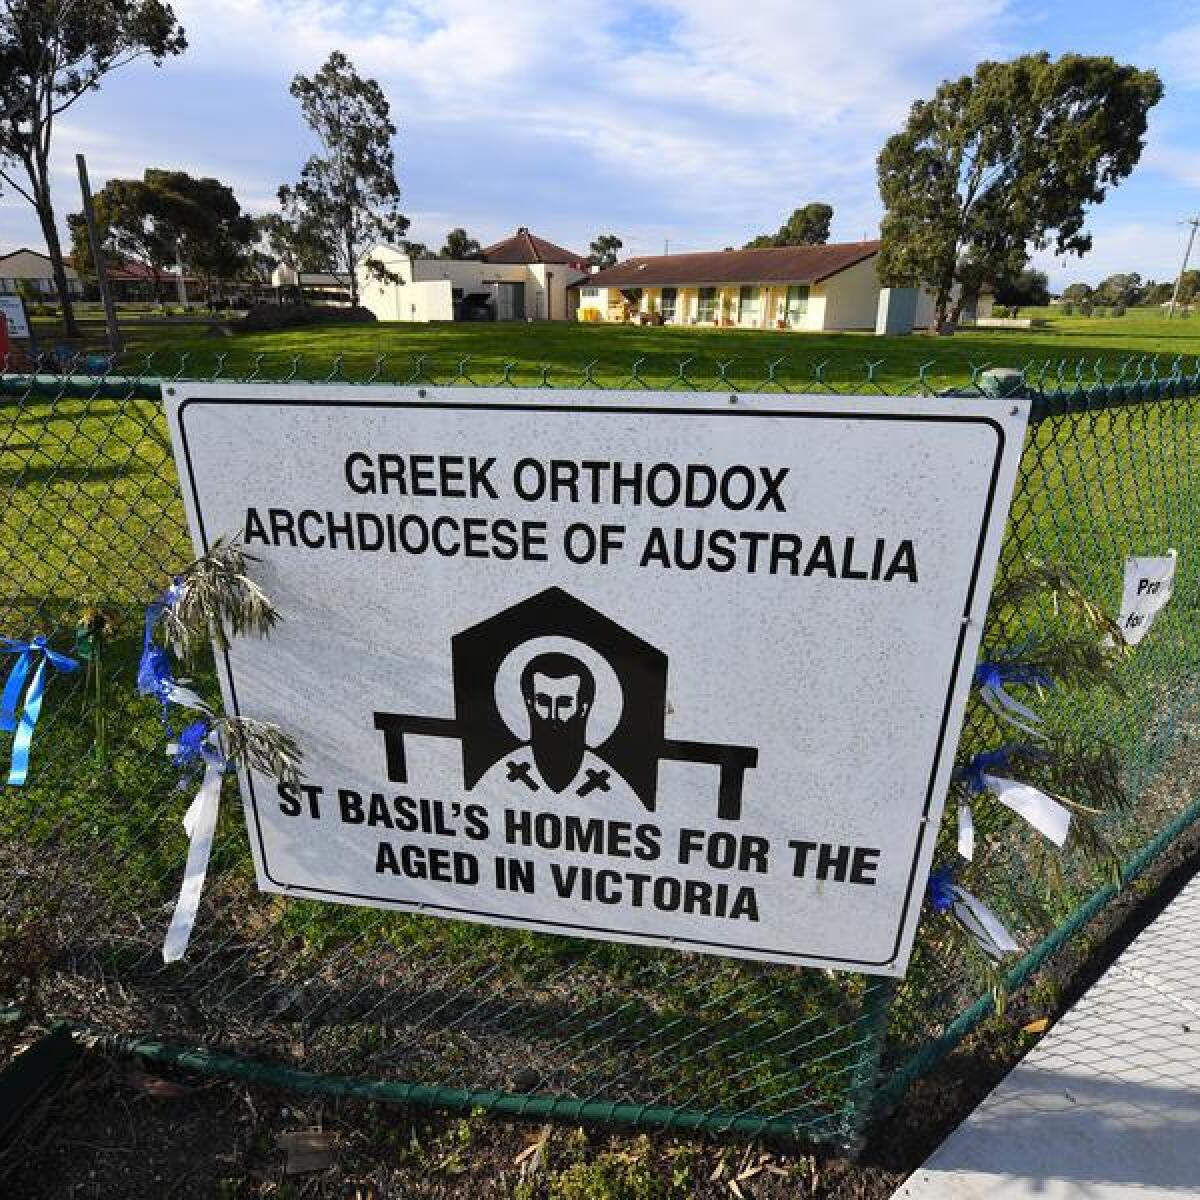 A sign for St Basil's Homes for the Aged in Melbourne.